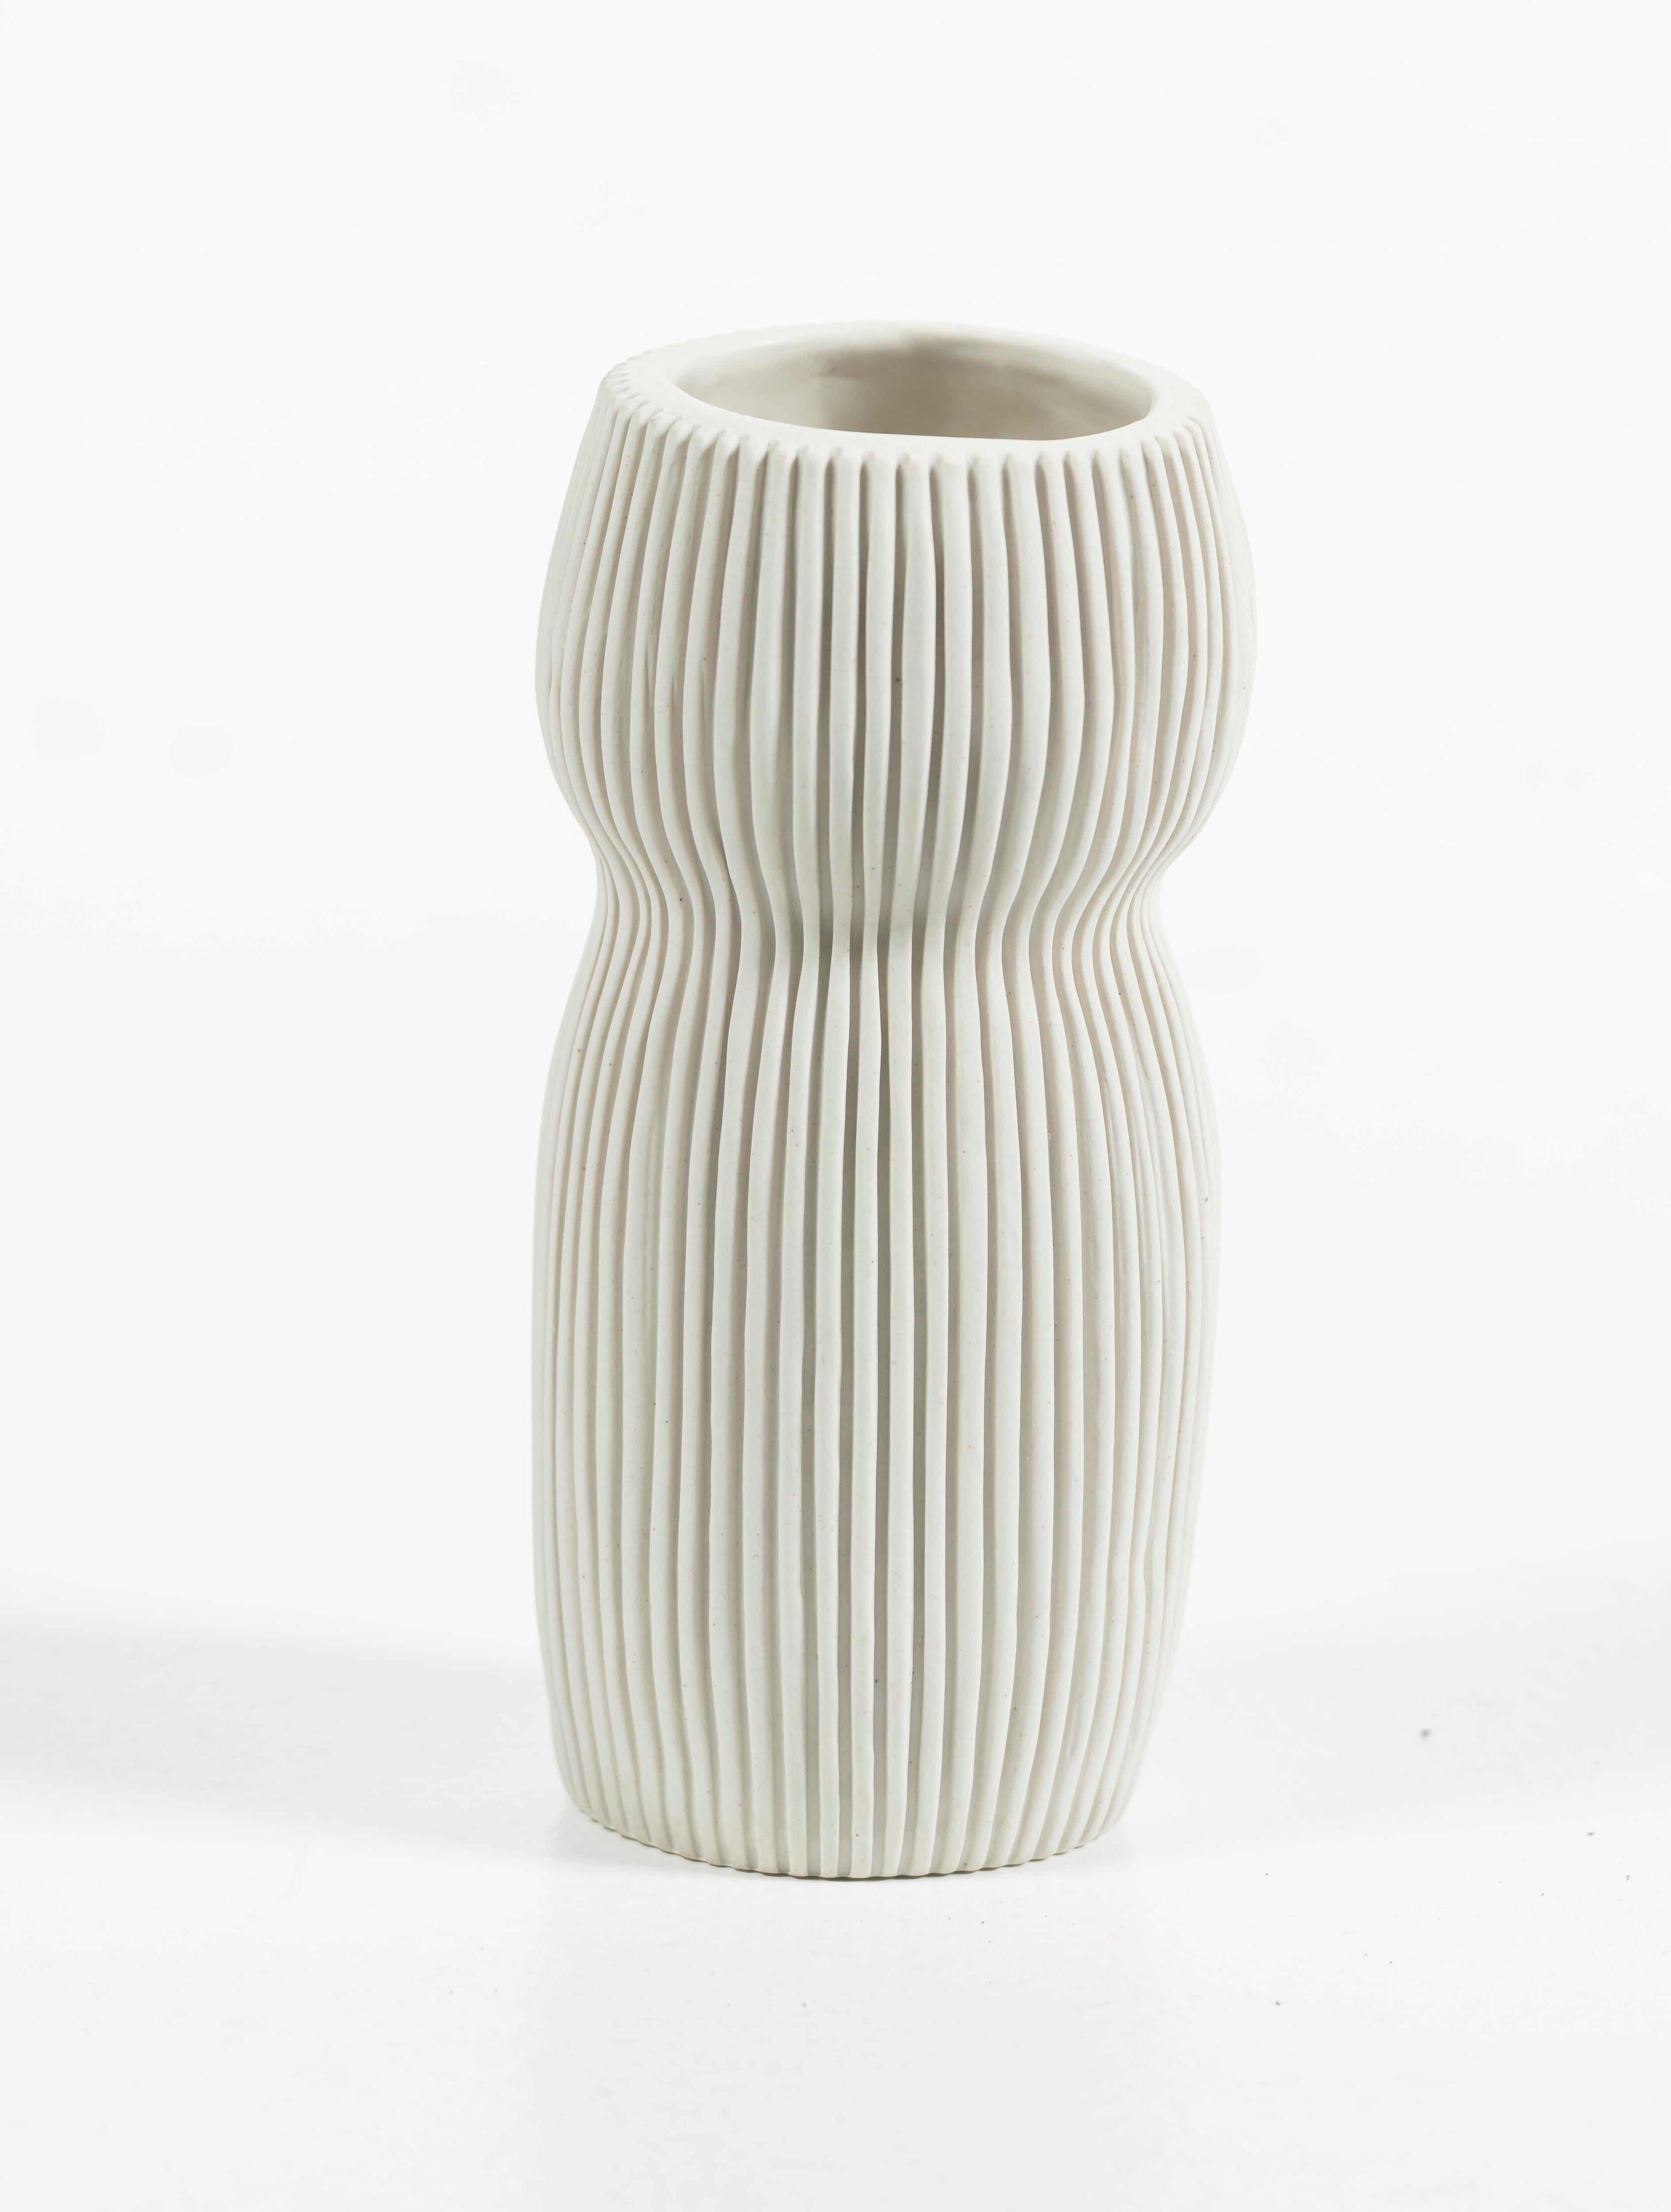 Hand Crafted Contemporary Ceramic Vase in Cream, signed For Sale 1